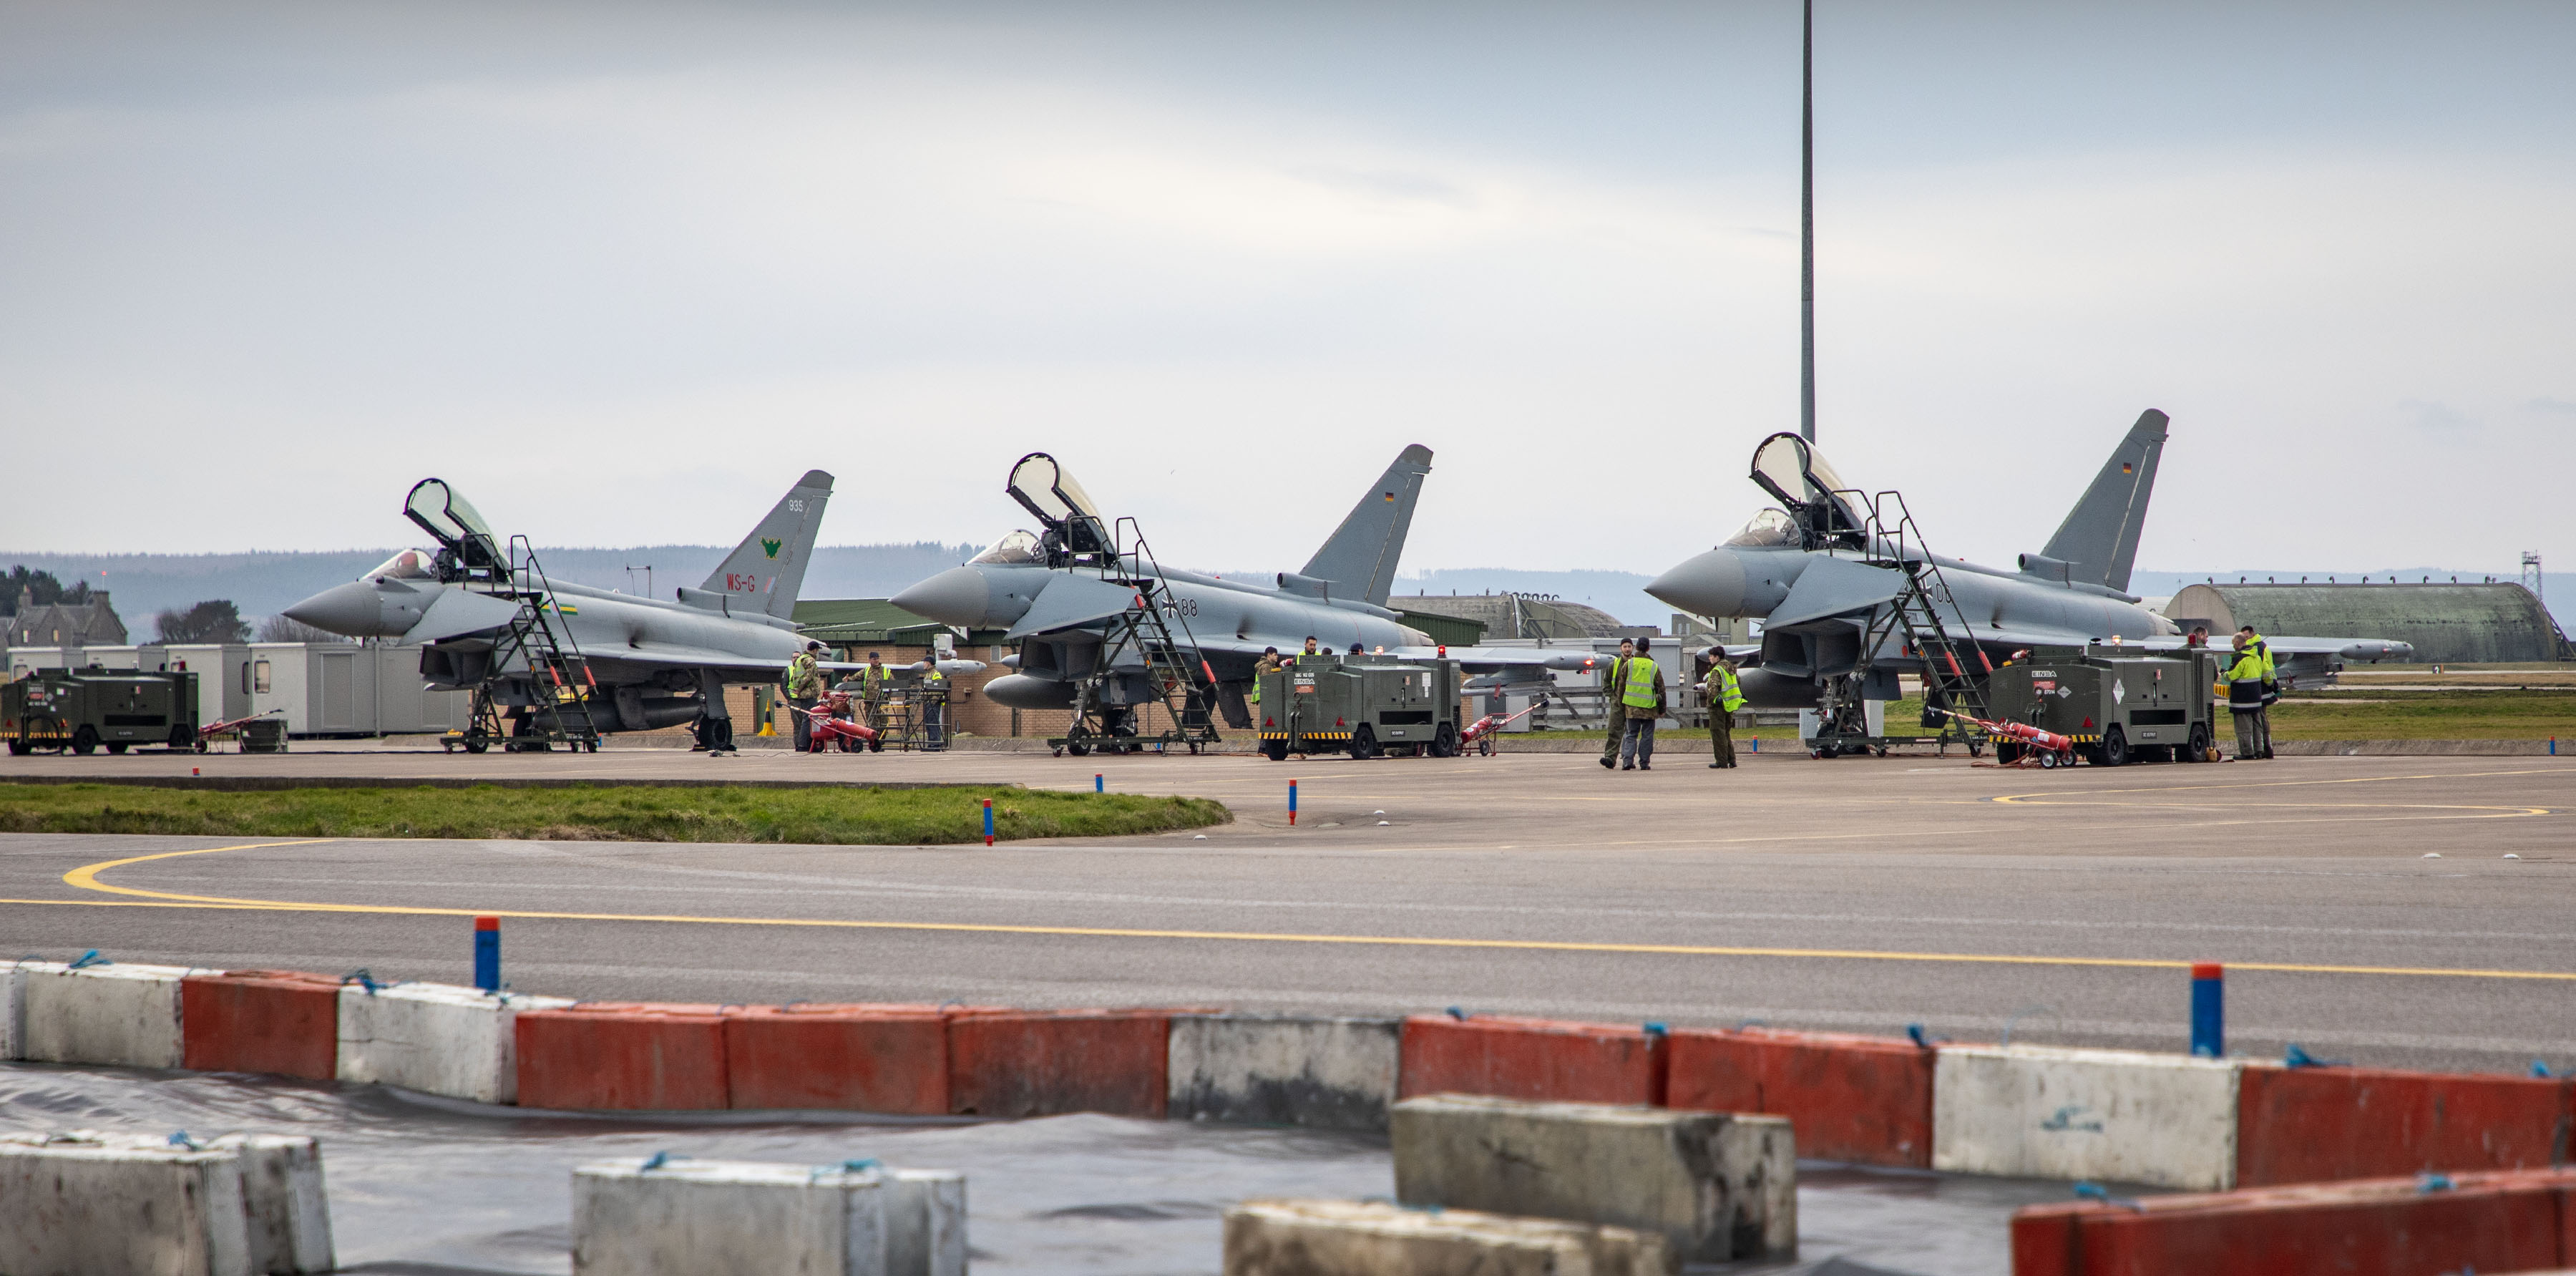 Image shows Typhoons on the airfield with the cockpits open.